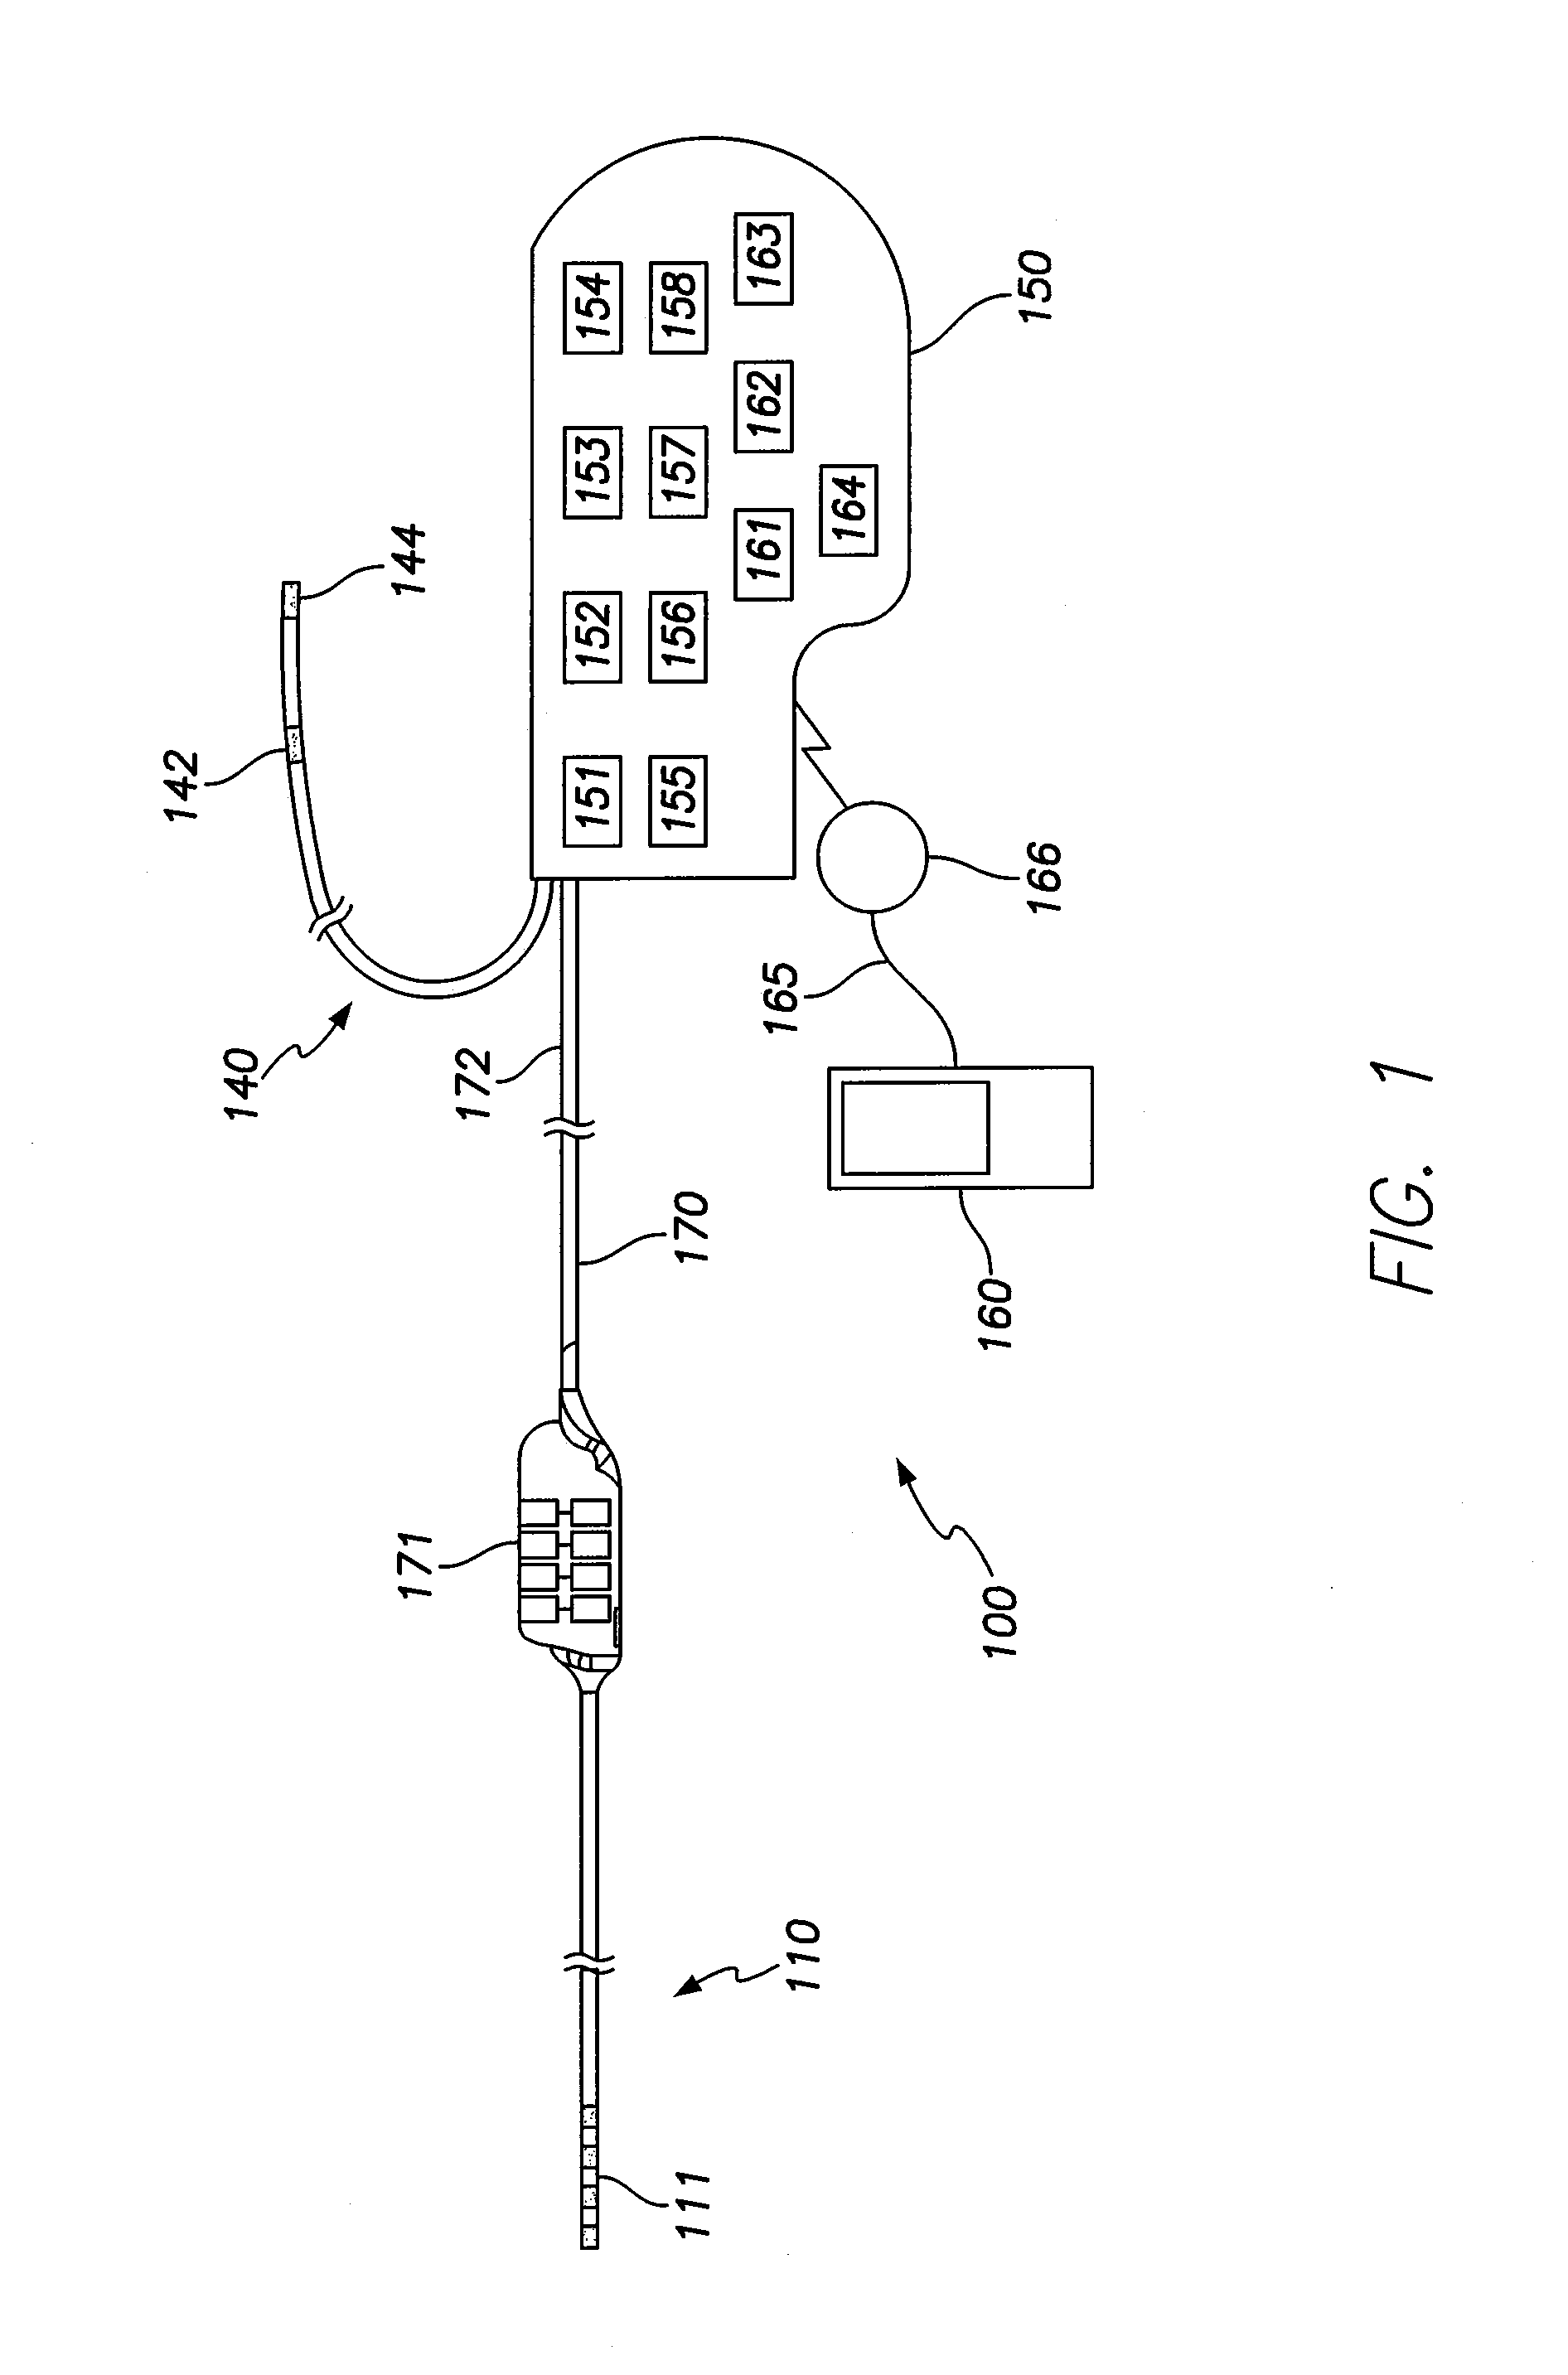 Method and system to provide neural stimulation therapy to assist anti-tachycardia pacing therapy